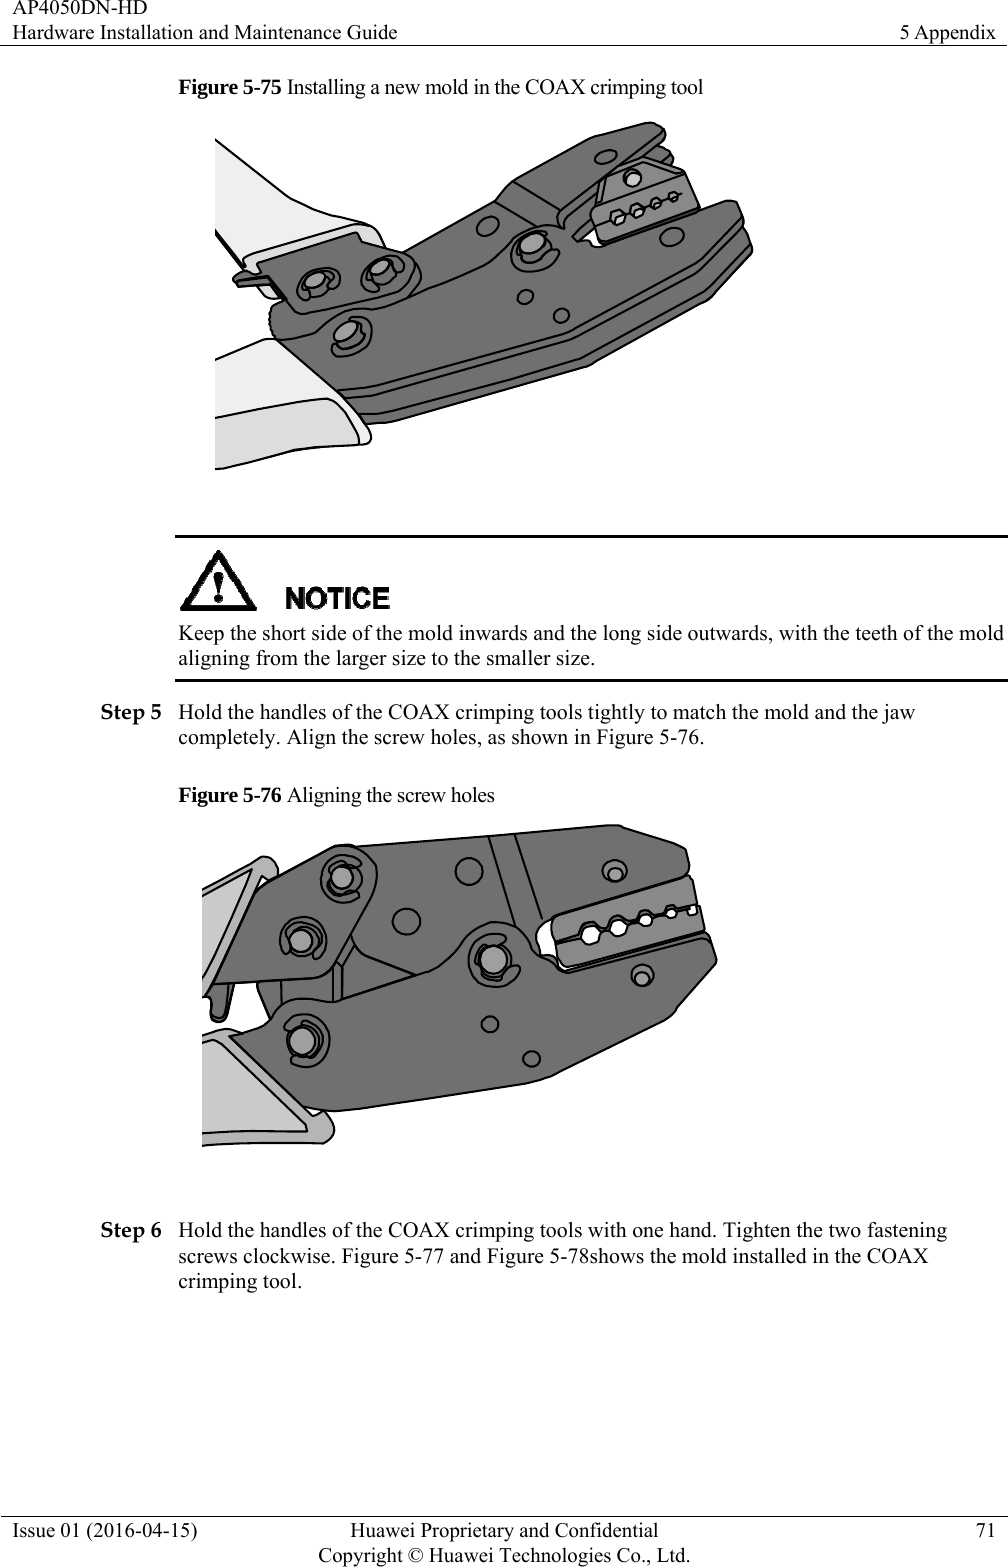 AP4050DN-HD Hardware Installation and Maintenance Guide  5 Appendix Issue 01 (2016-04-15)  Huawei Proprietary and Confidential         Copyright © Huawei Technologies Co., Ltd.71 Figure 5-75 Installing a new mold in the COAX crimping tool    Keep the short side of the mold inwards and the long side outwards, with the teeth of the mold aligning from the larger size to the smaller size. Step 5 Hold the handles of the COAX crimping tools tightly to match the mold and the jaw completely. Align the screw holes, as shown in Figure 5-76. Figure 5-76 Aligning the screw holes   Step 6 Hold the handles of the COAX crimping tools with one hand. Tighten the two fastening screws clockwise. Figure 5-77 and Figure 5-78shows the mold installed in the COAX crimping tool. 